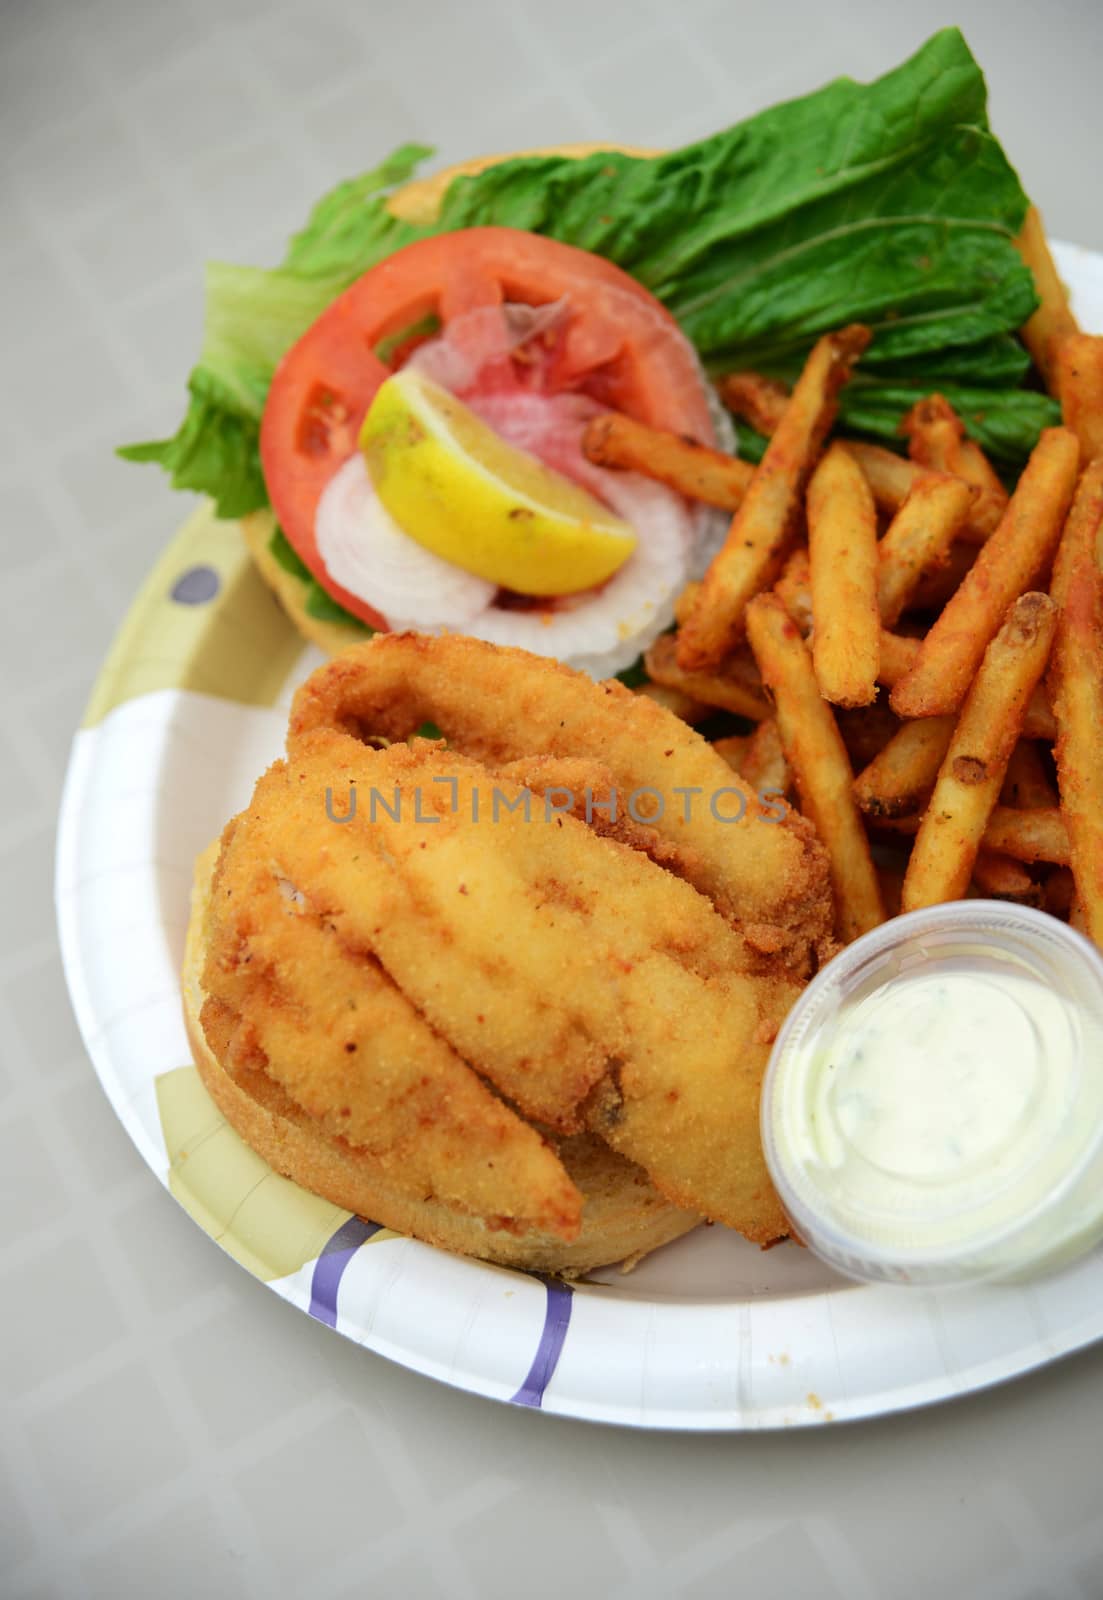 fried fish lunch with fries by ftlaudgirl